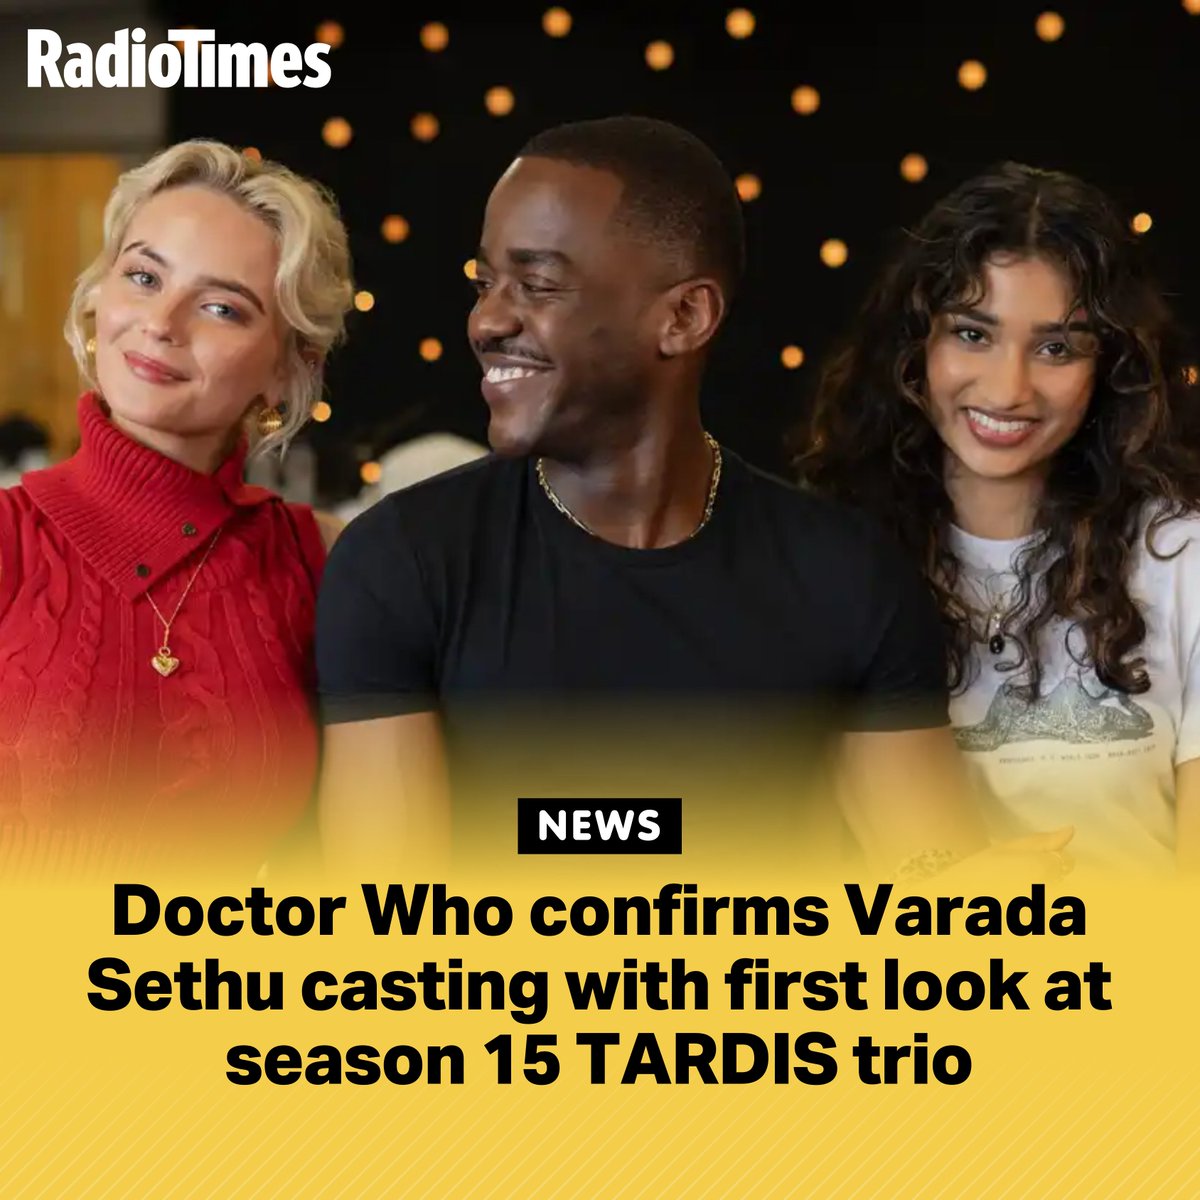 #DoctorWho confirms Varada Sethu casting as a companion with a new look at the season 15 TARDIS trio 💙 💙 💙 Read the full story here: radiotimes.com/tv/sci-fi/doct…